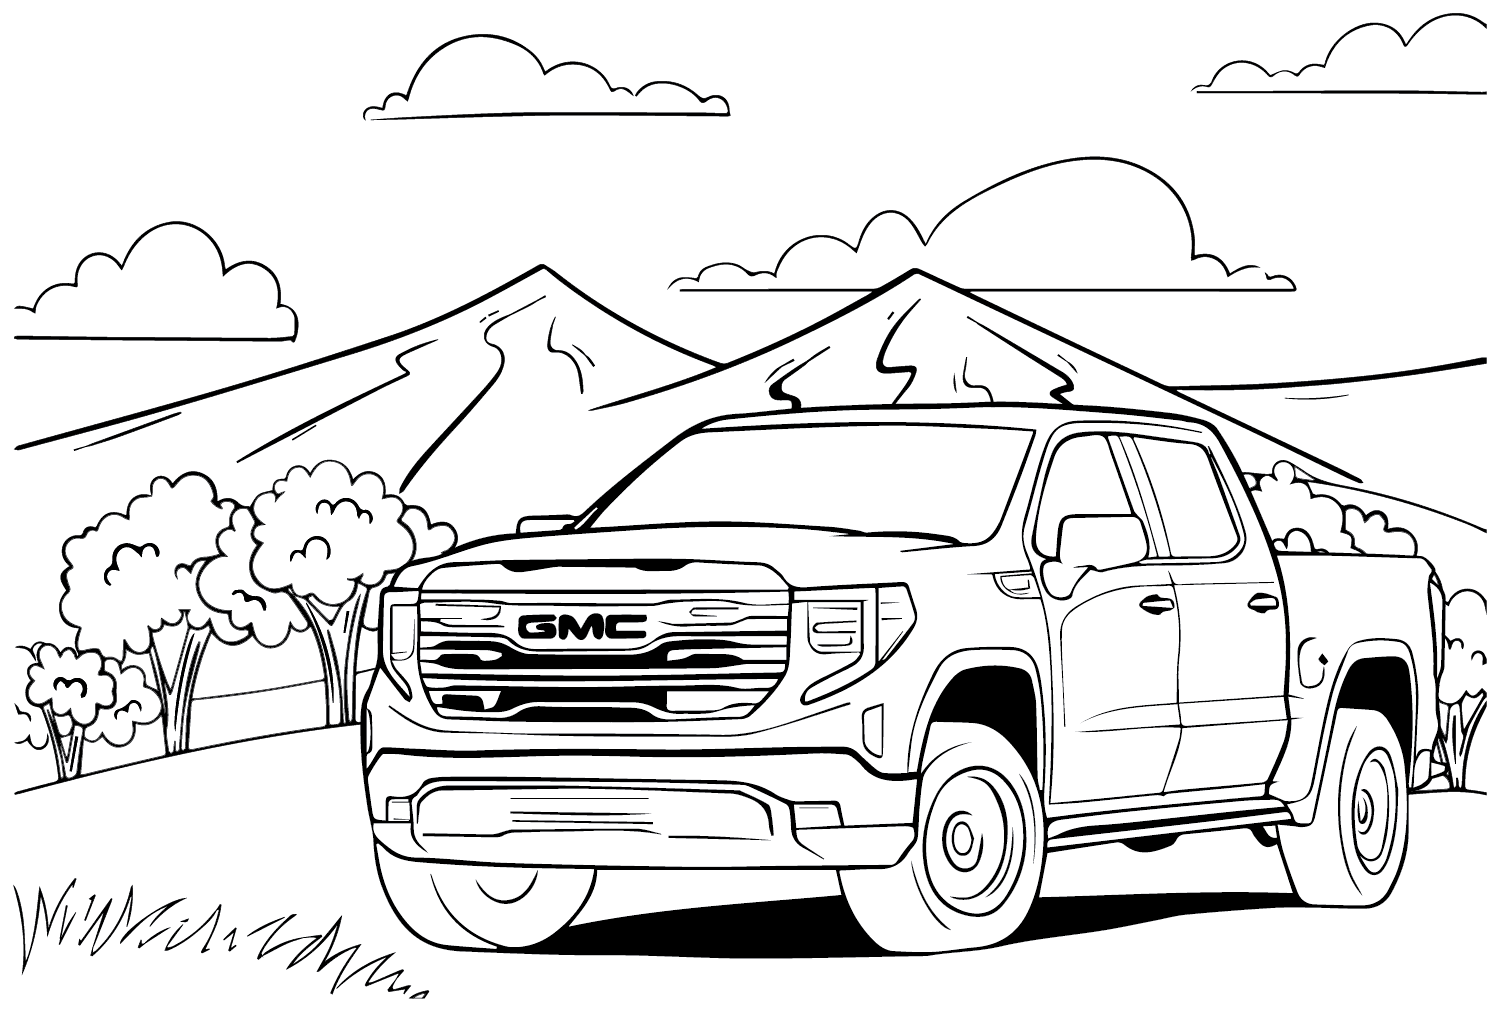 GMC Canyon Extended Cab Coloring Page - Free Printable Coloring Pages